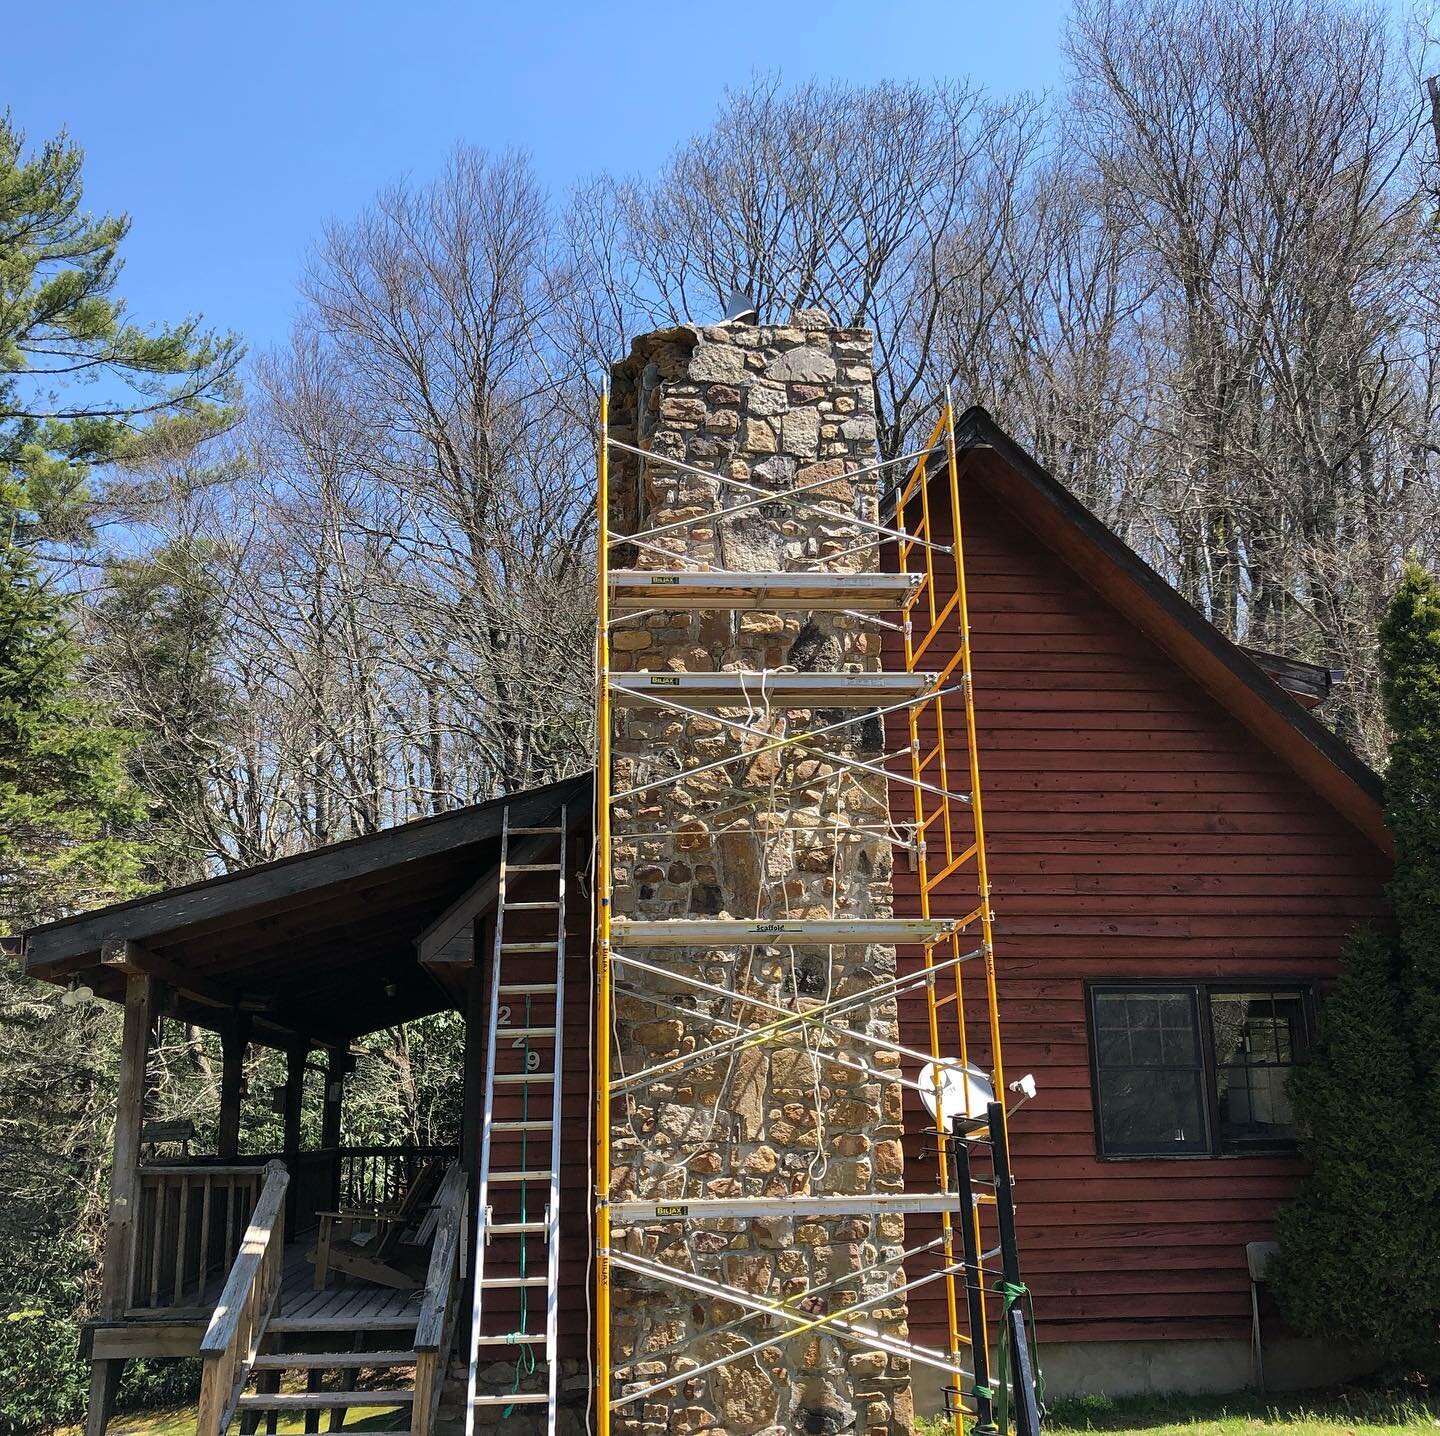 Getting some much needed repair work done on our beautiful chimney. Had some major cracks and a few missing stones from the rough weather over the years. Bringing this beauty back to life! #theblowingrockcabin